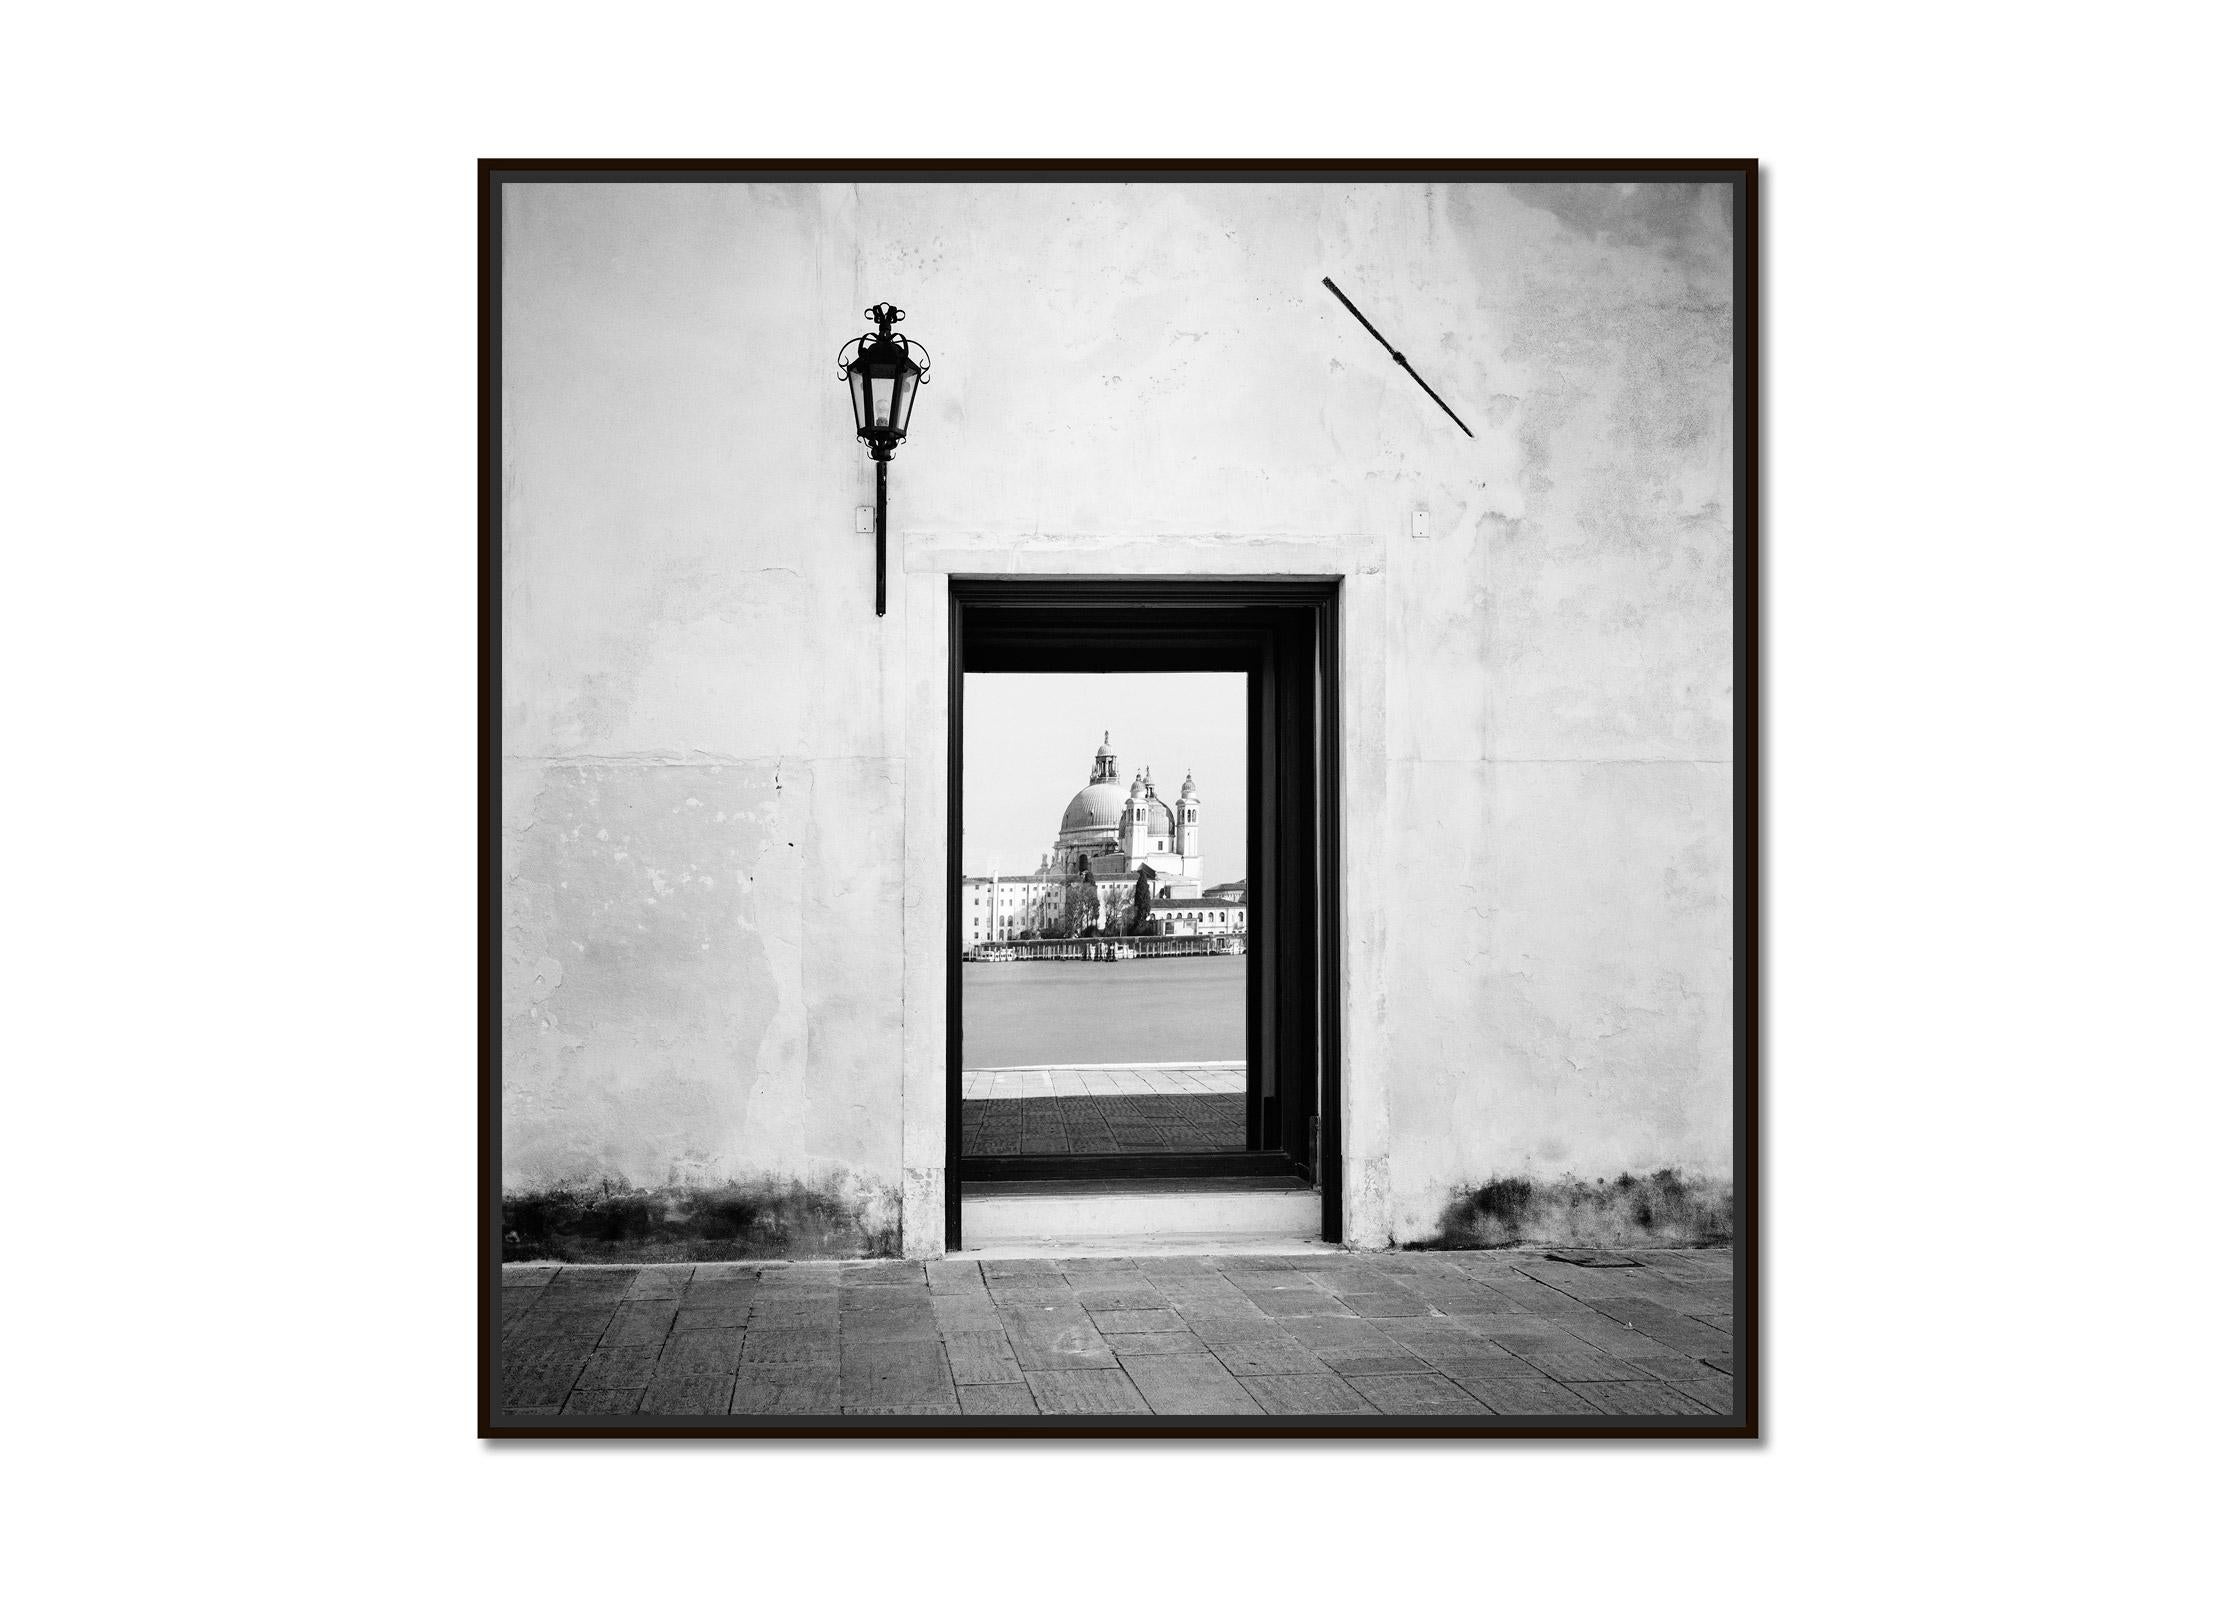 Reflection, Venice, Italy, black and white fine art landscape photography print - Photograph by Gerald Berghammer